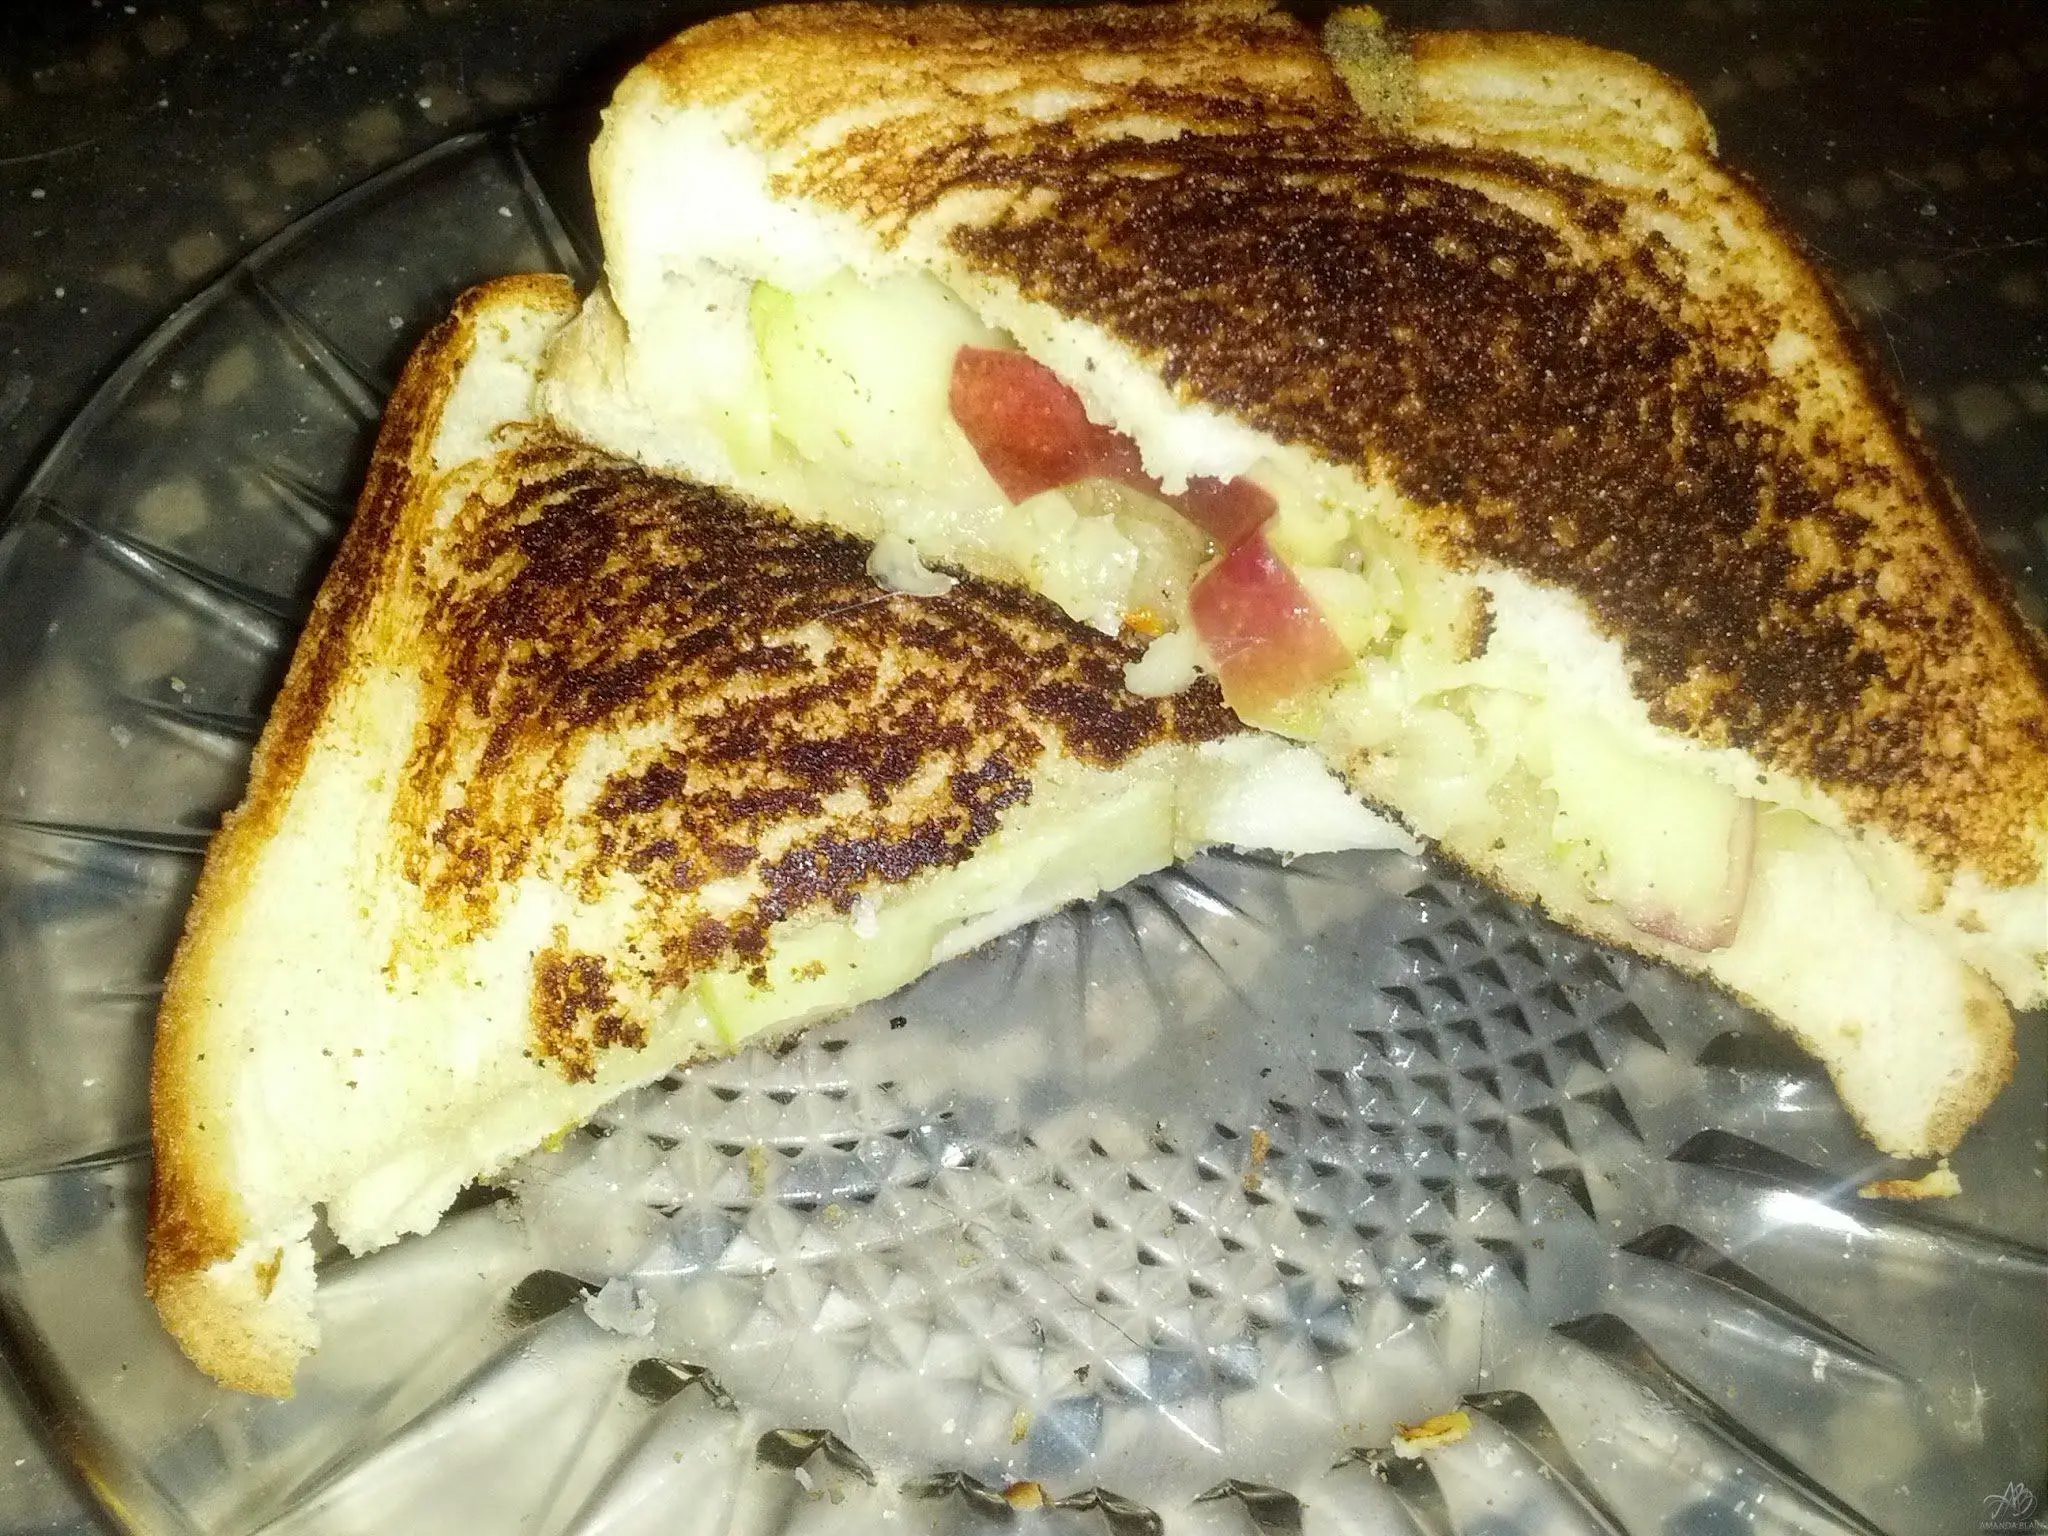 Red Macantosh Apples, Gruyere Swiss Cheese with a Drizzle of Honey Grill Cheese...